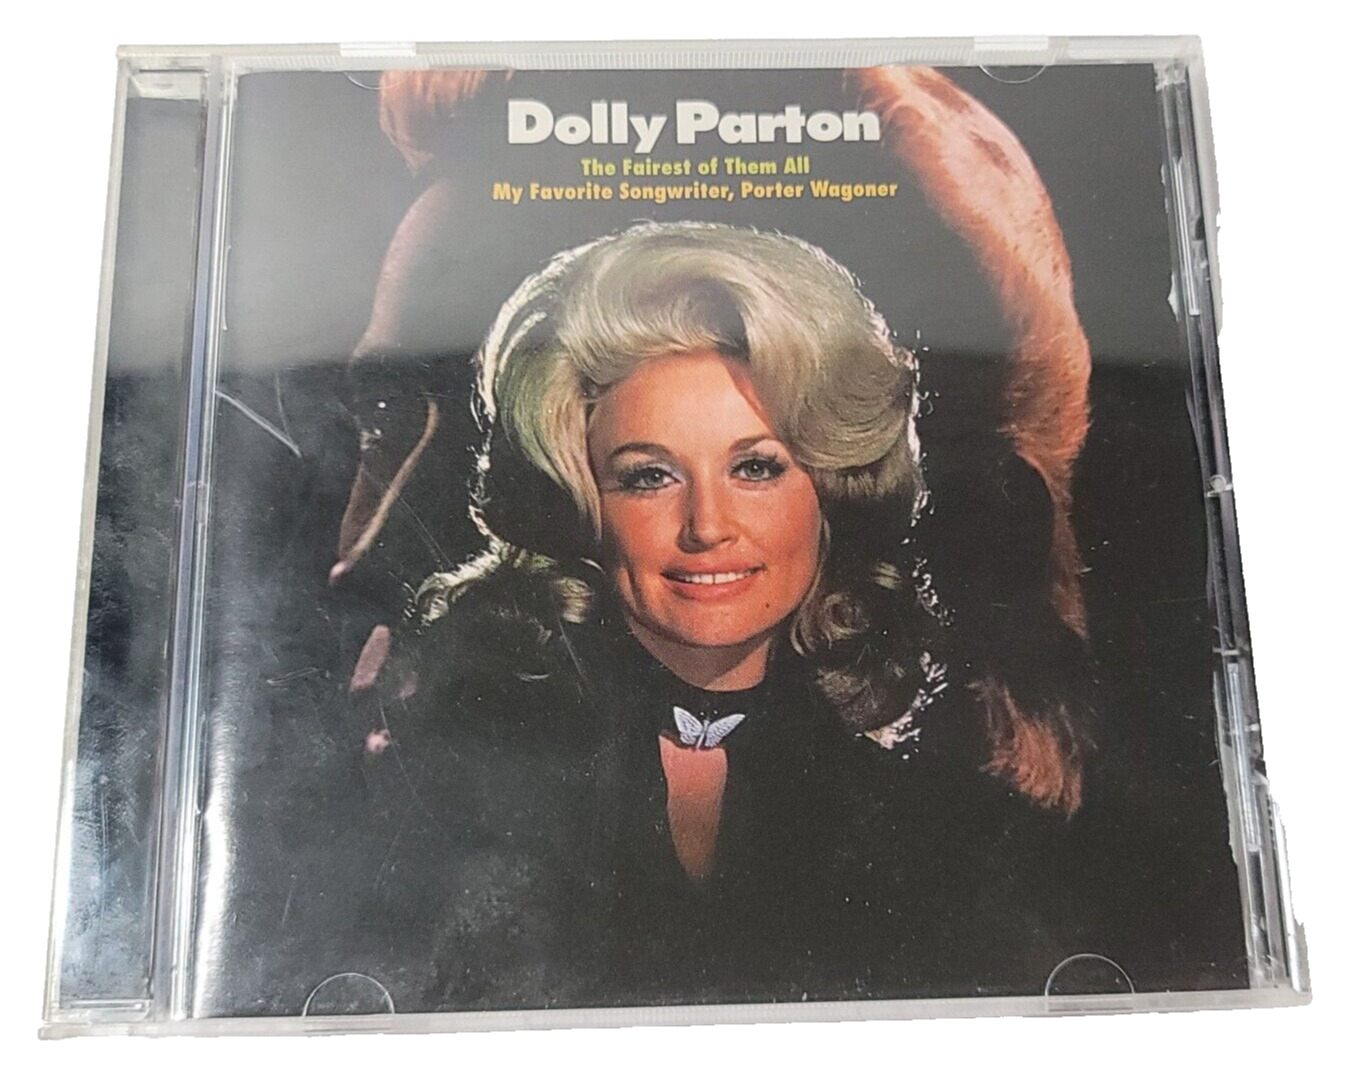 Dolly Parton - The Fairest Of Them All/My Favorite Songwriter, Porter Wagoner CD